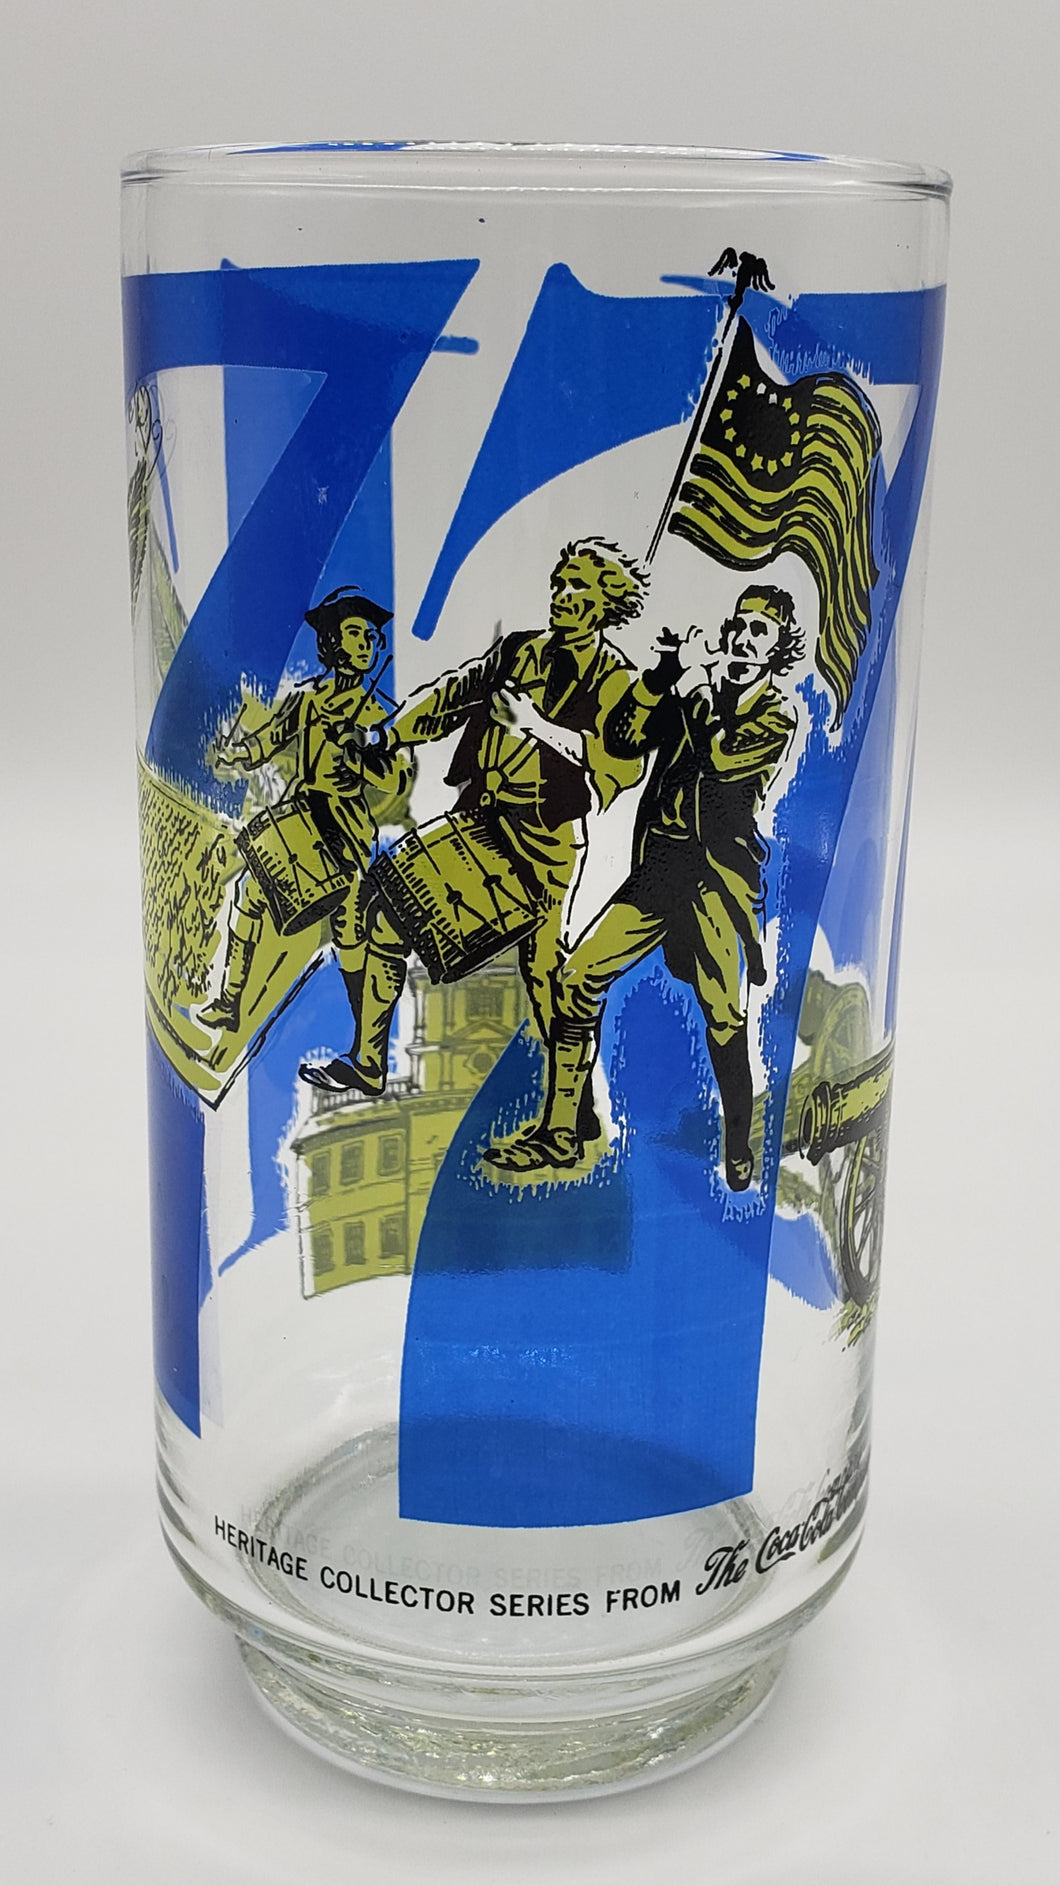 1776-1976 Bicentennial Heritage Collectors Series Coca Cola Drinking Glass